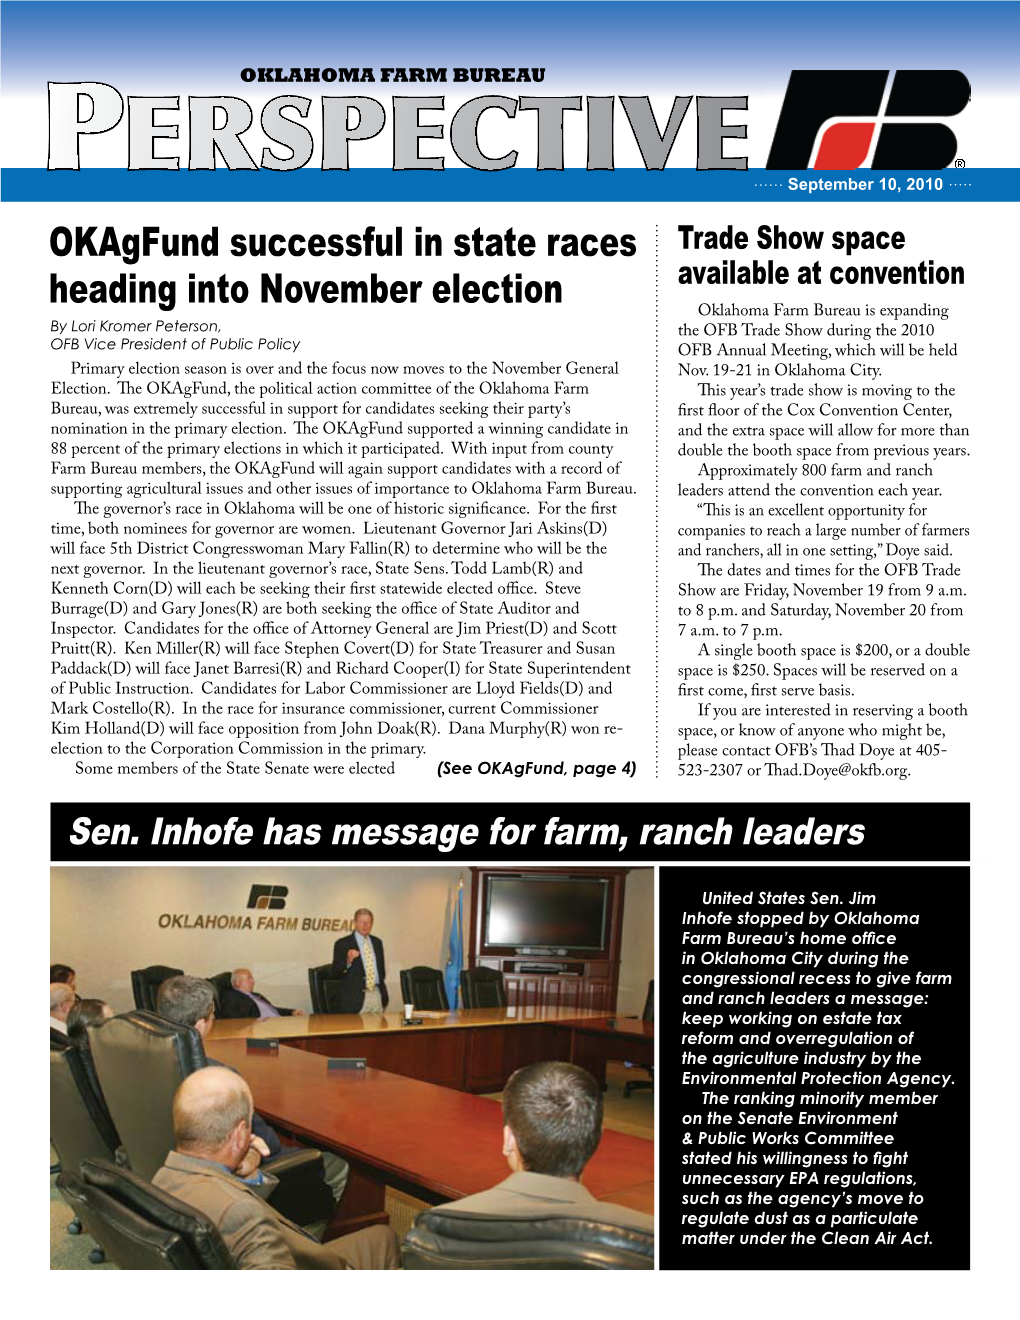 Okagfund Successful in State Races Heading Into November Election